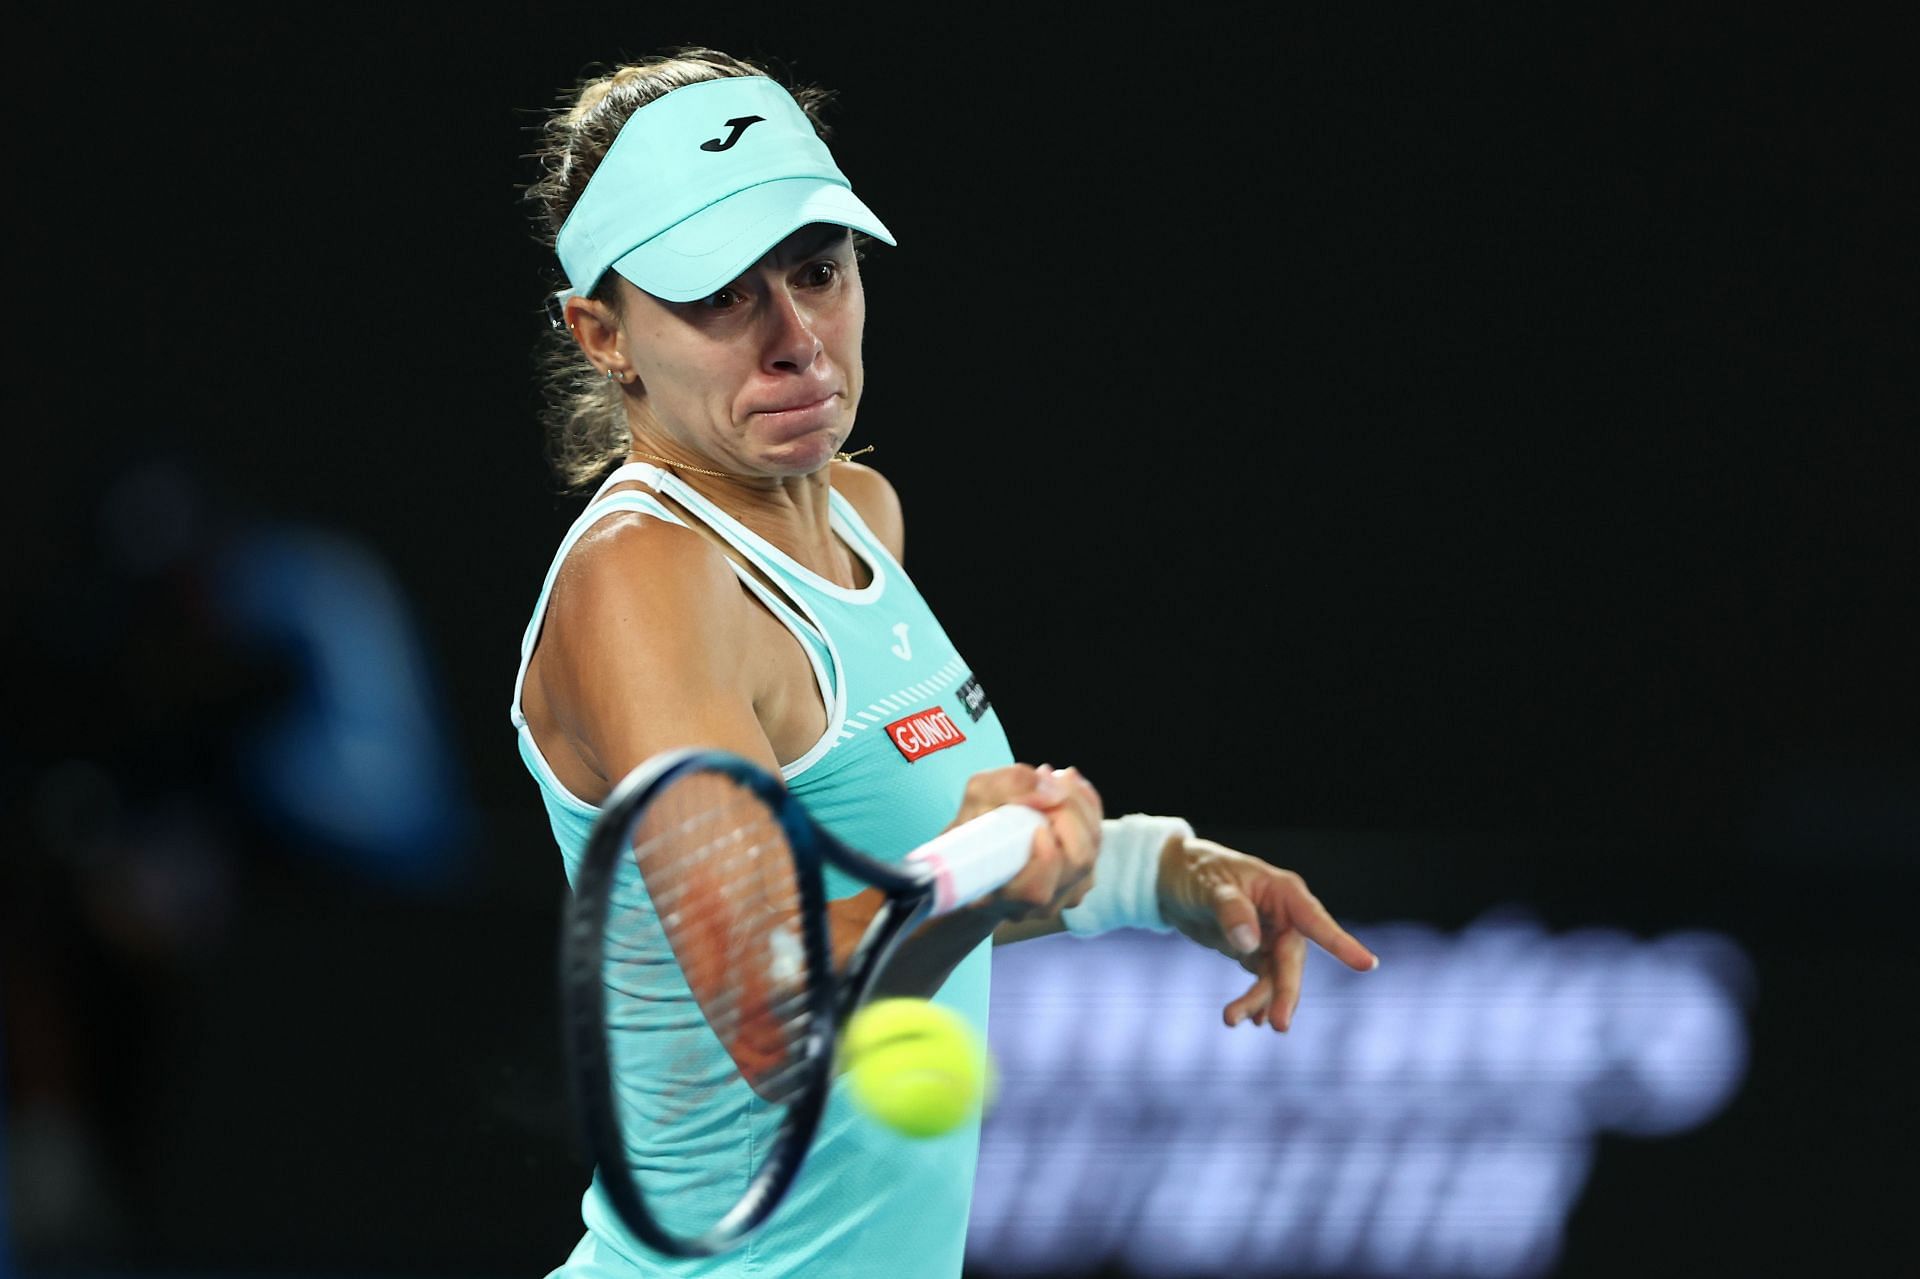 Magda Linette at the 2023 Australian Open - Day 11